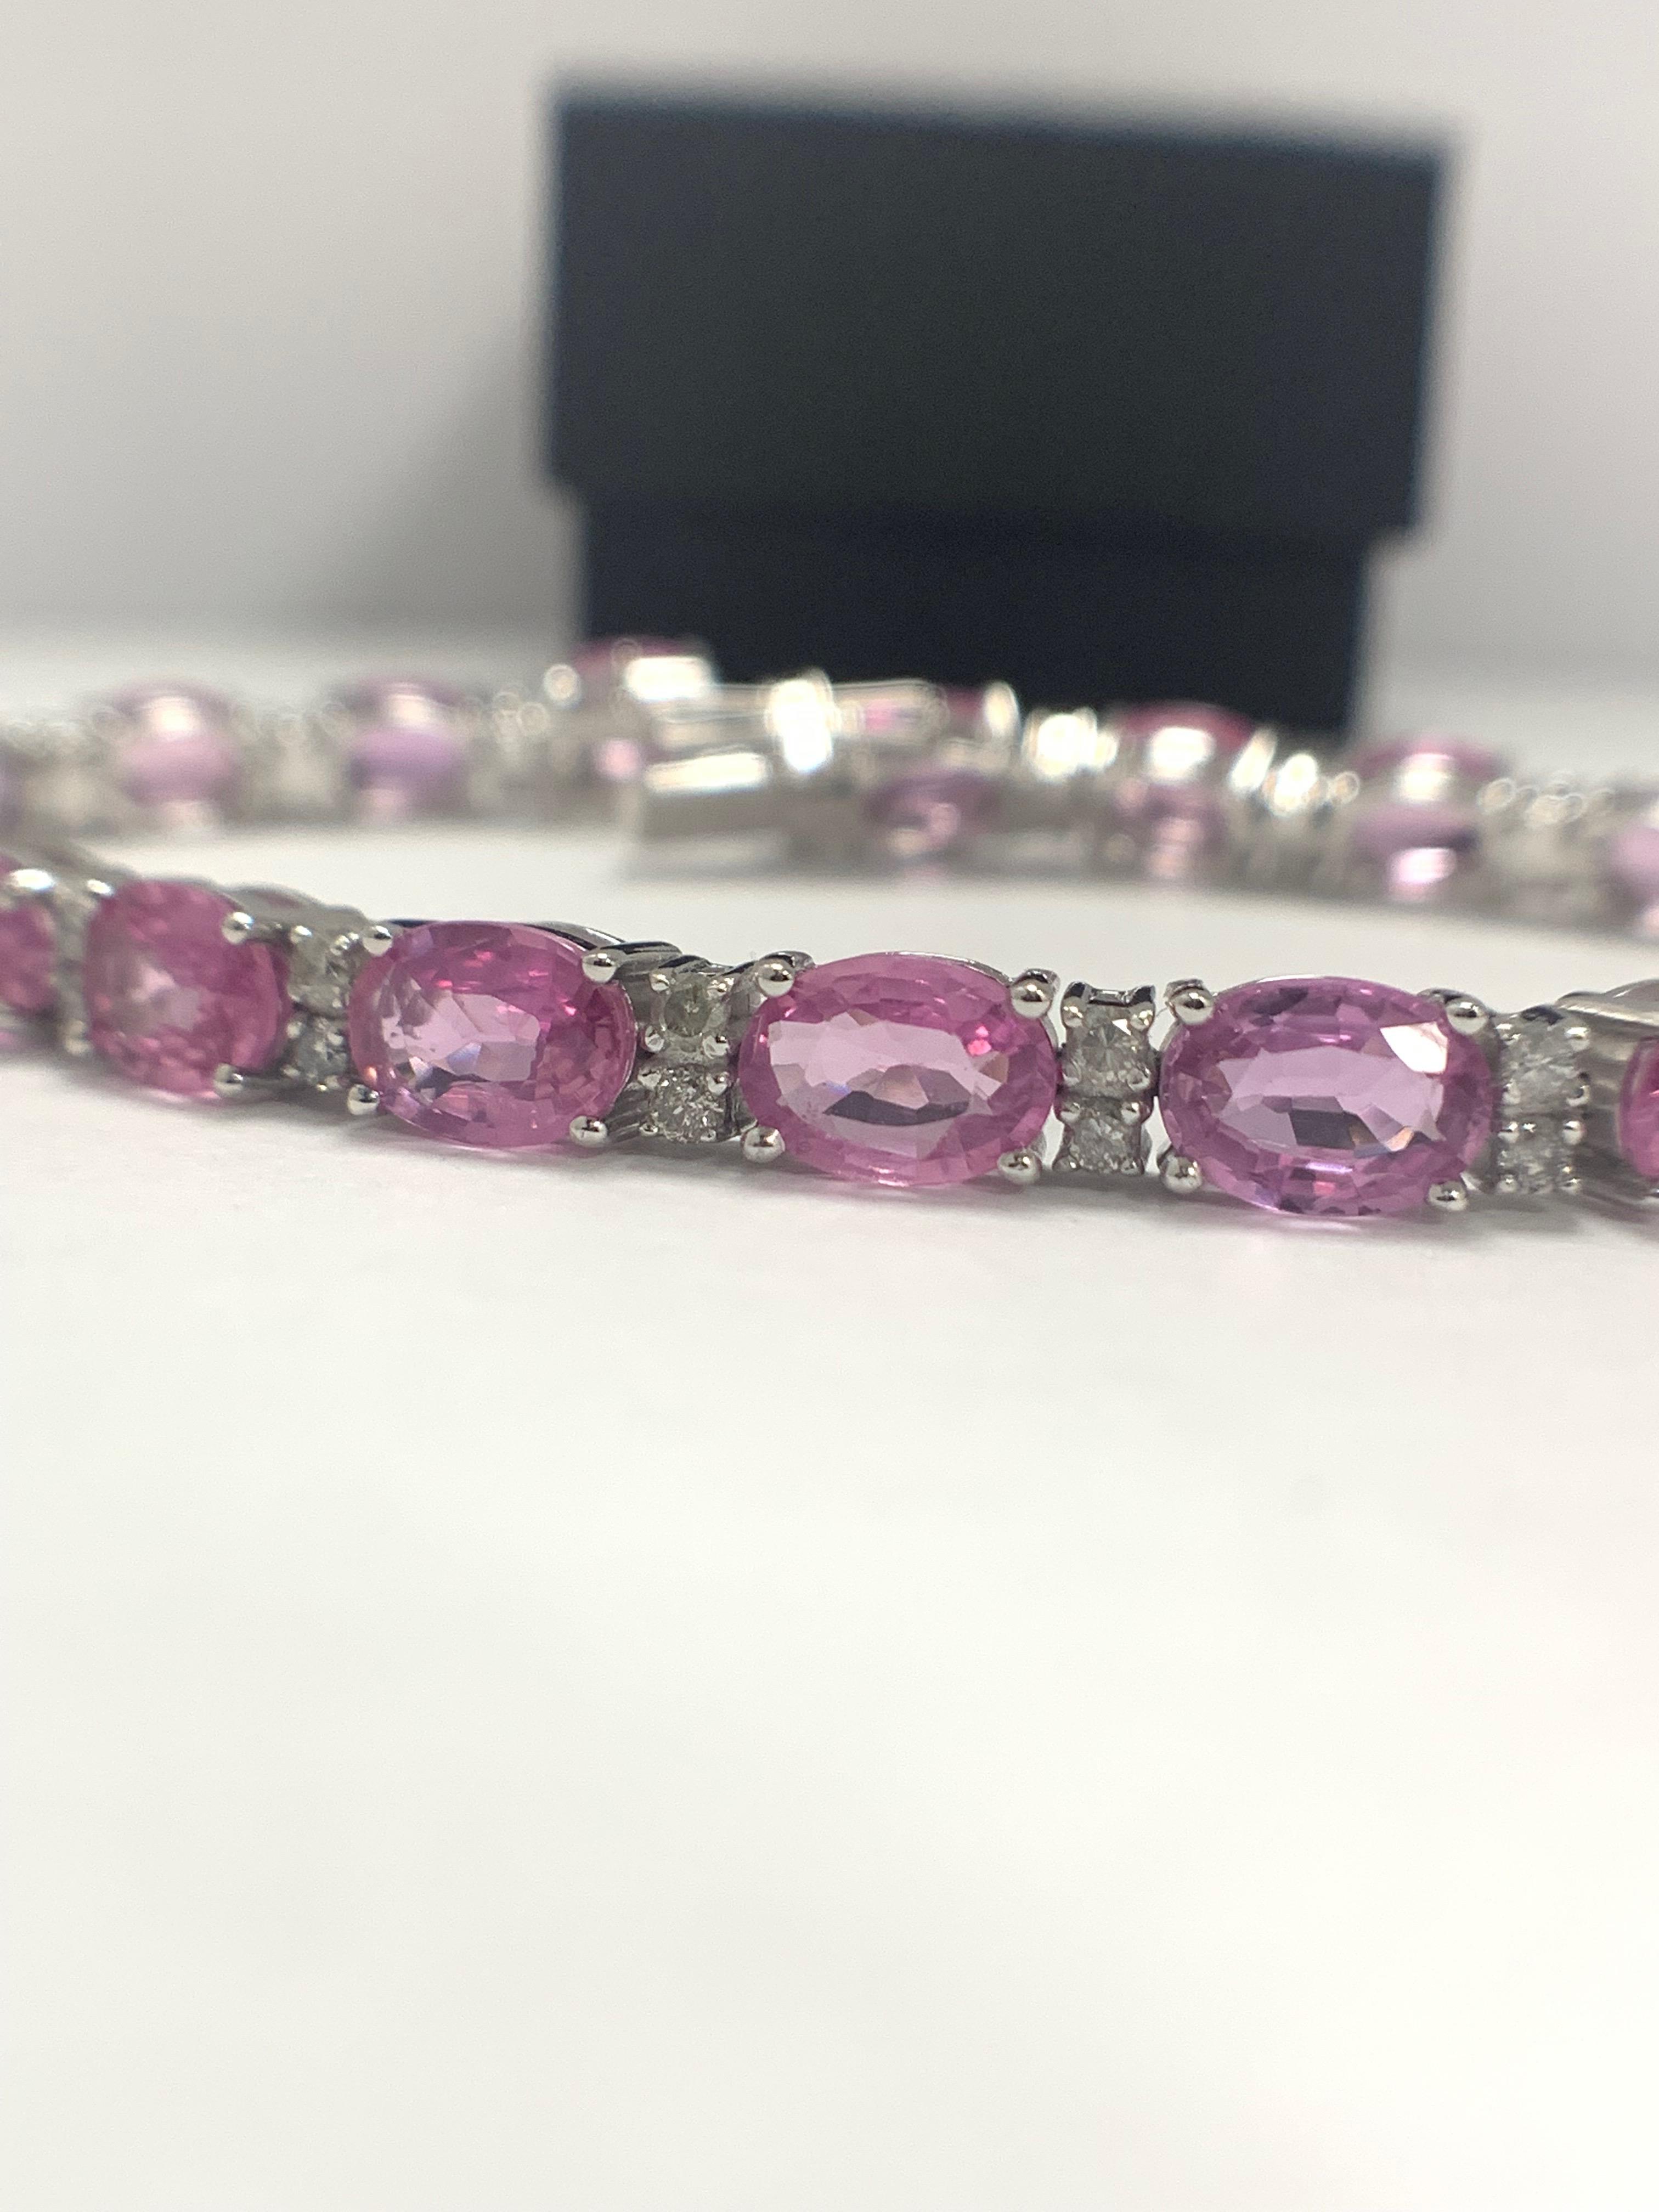 14ct White Gold Sapphire and Diamond bracelet featuring, 19 oval cut, pink Sapphires (15.93ct TSW) - Image 2 of 11